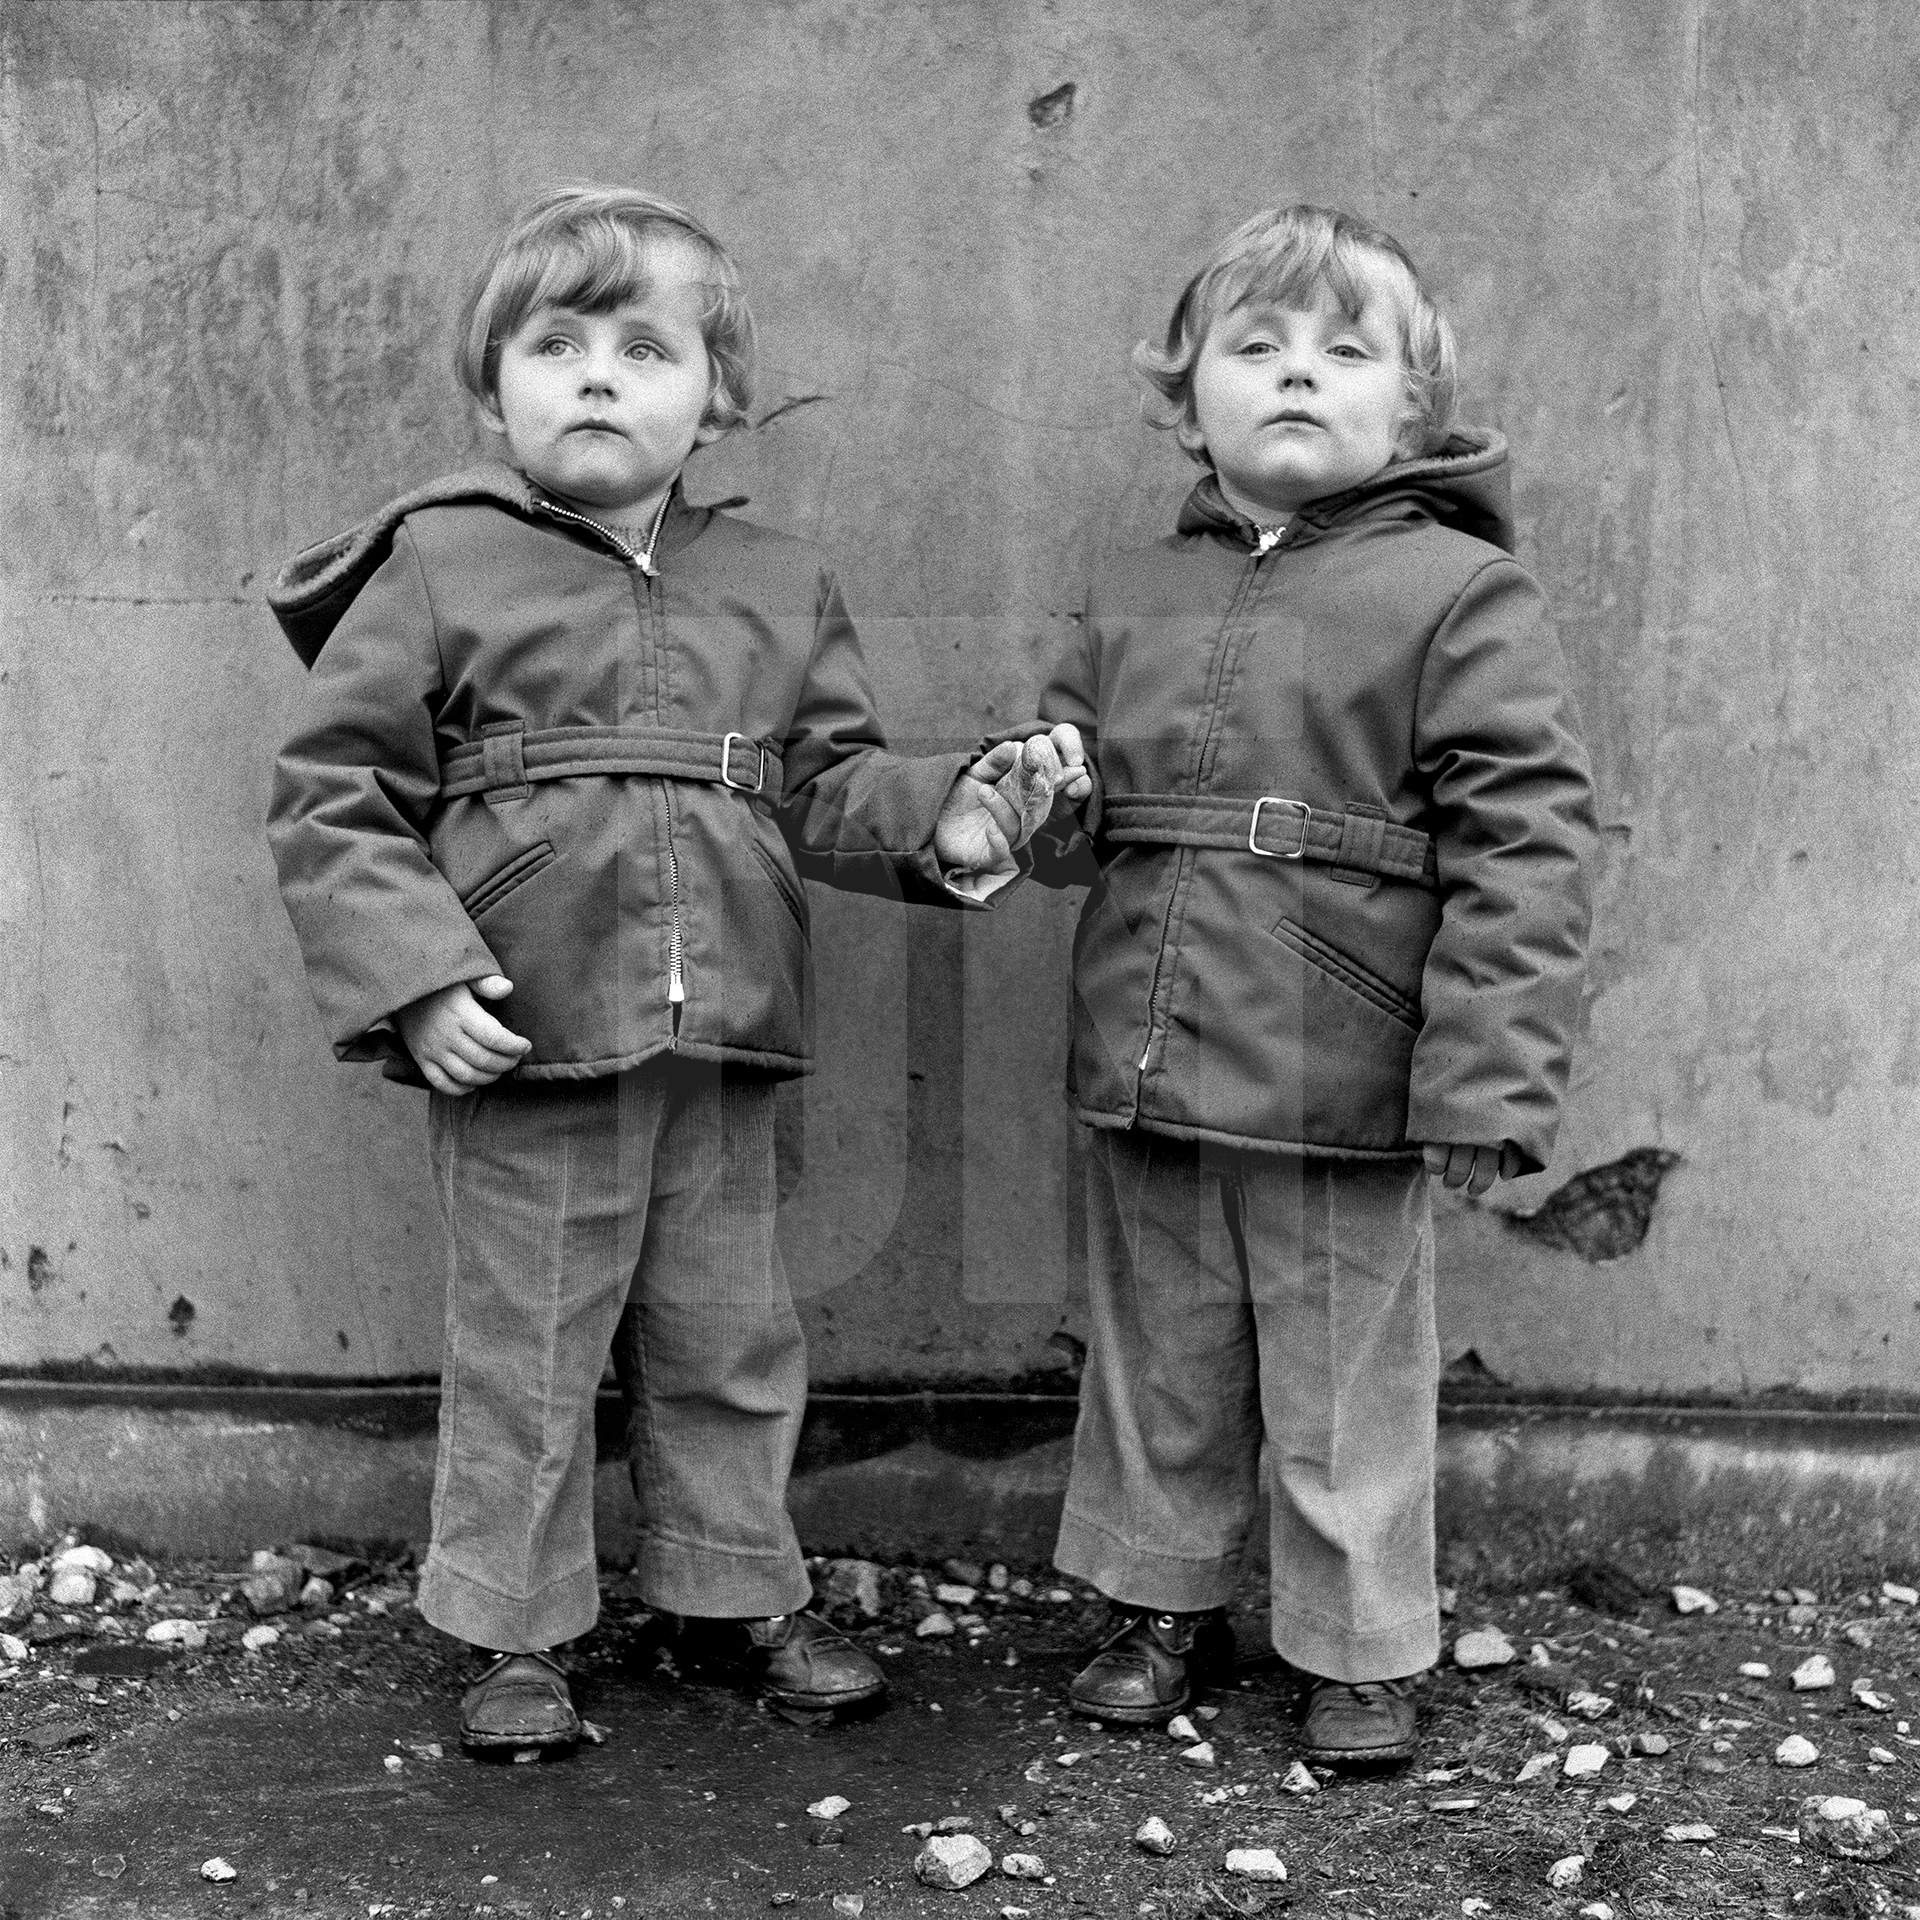 Twin brothers, left Michael McParland, right Peter McParland, Barrow-in-Furness, Cumbria. November 1974 by Daniel Meadows